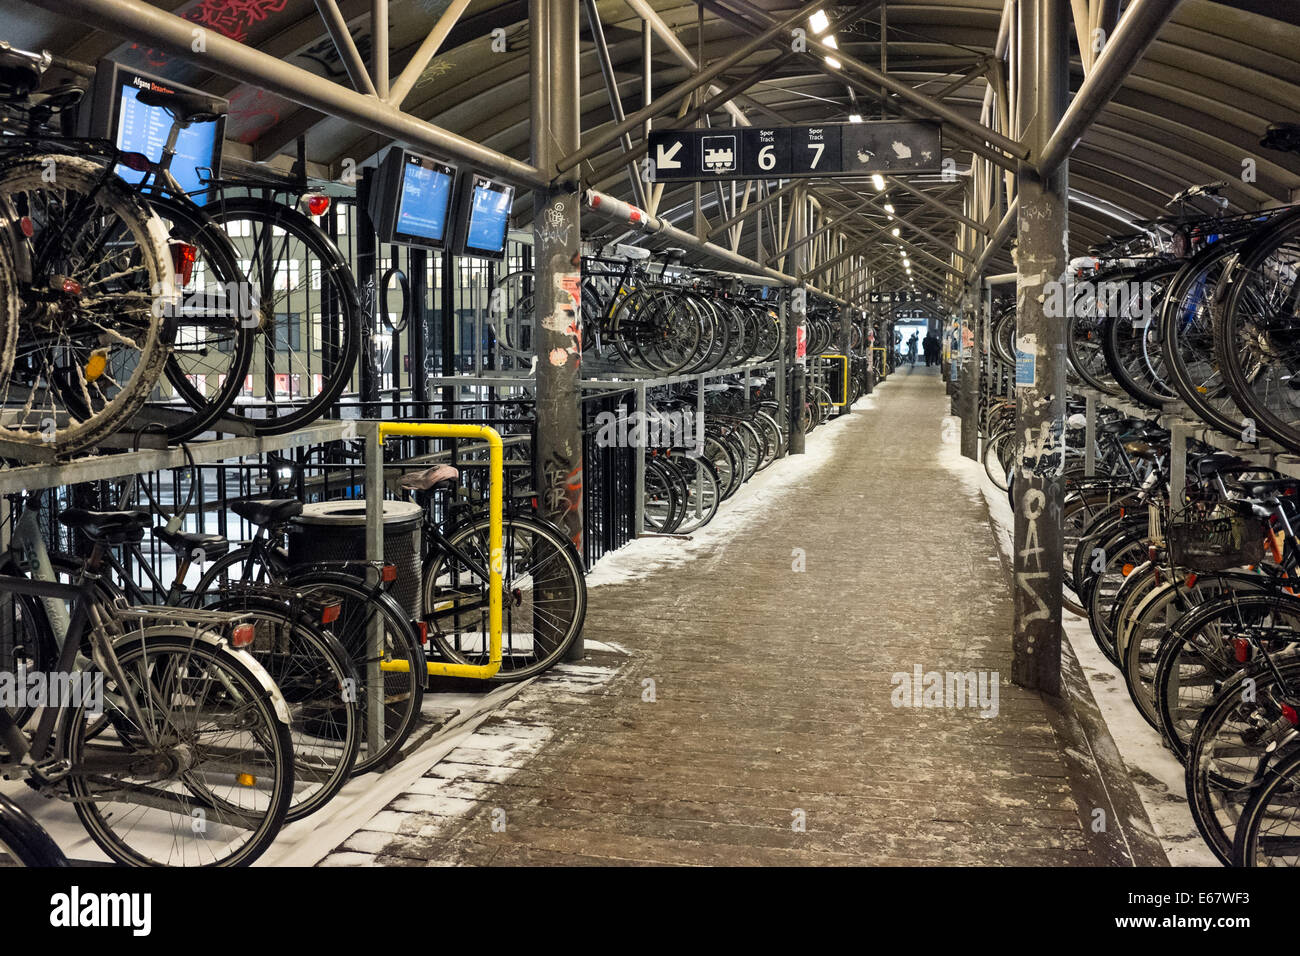 Bike parking in the train station over the train lines, in Aarhus, Denmark, Europe Stock Photo